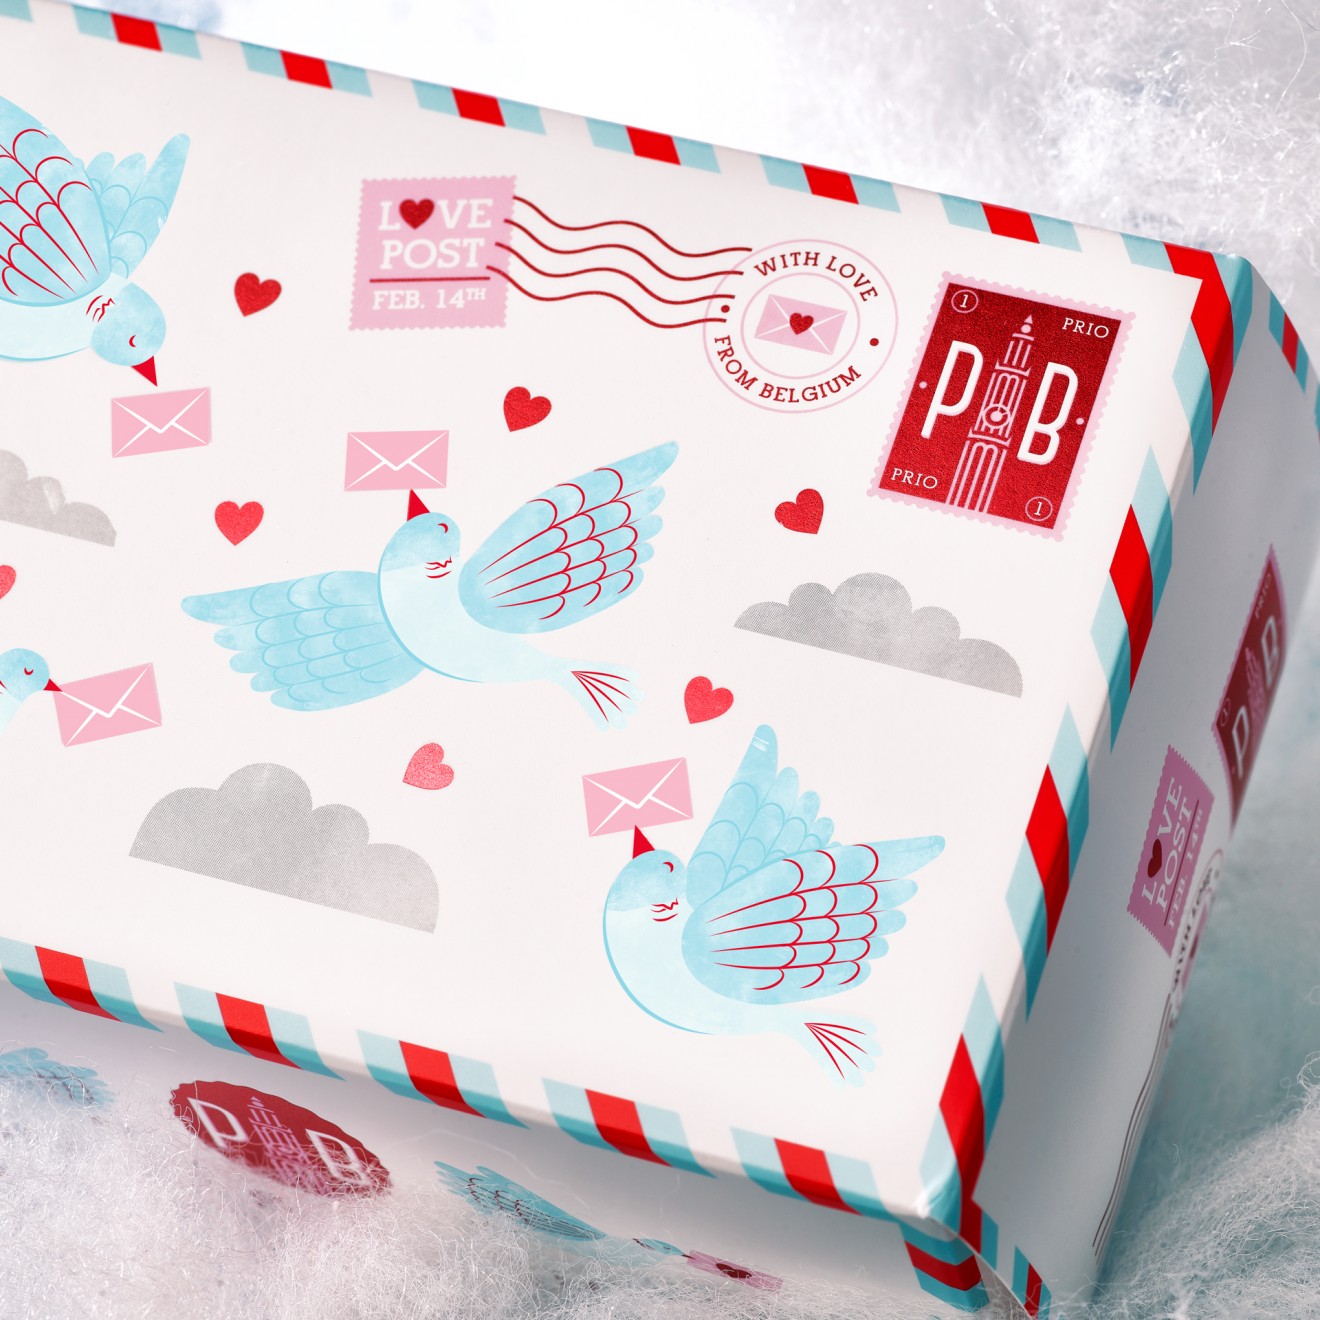 Quatre Mains package design - mail, birds, hearts, packaging